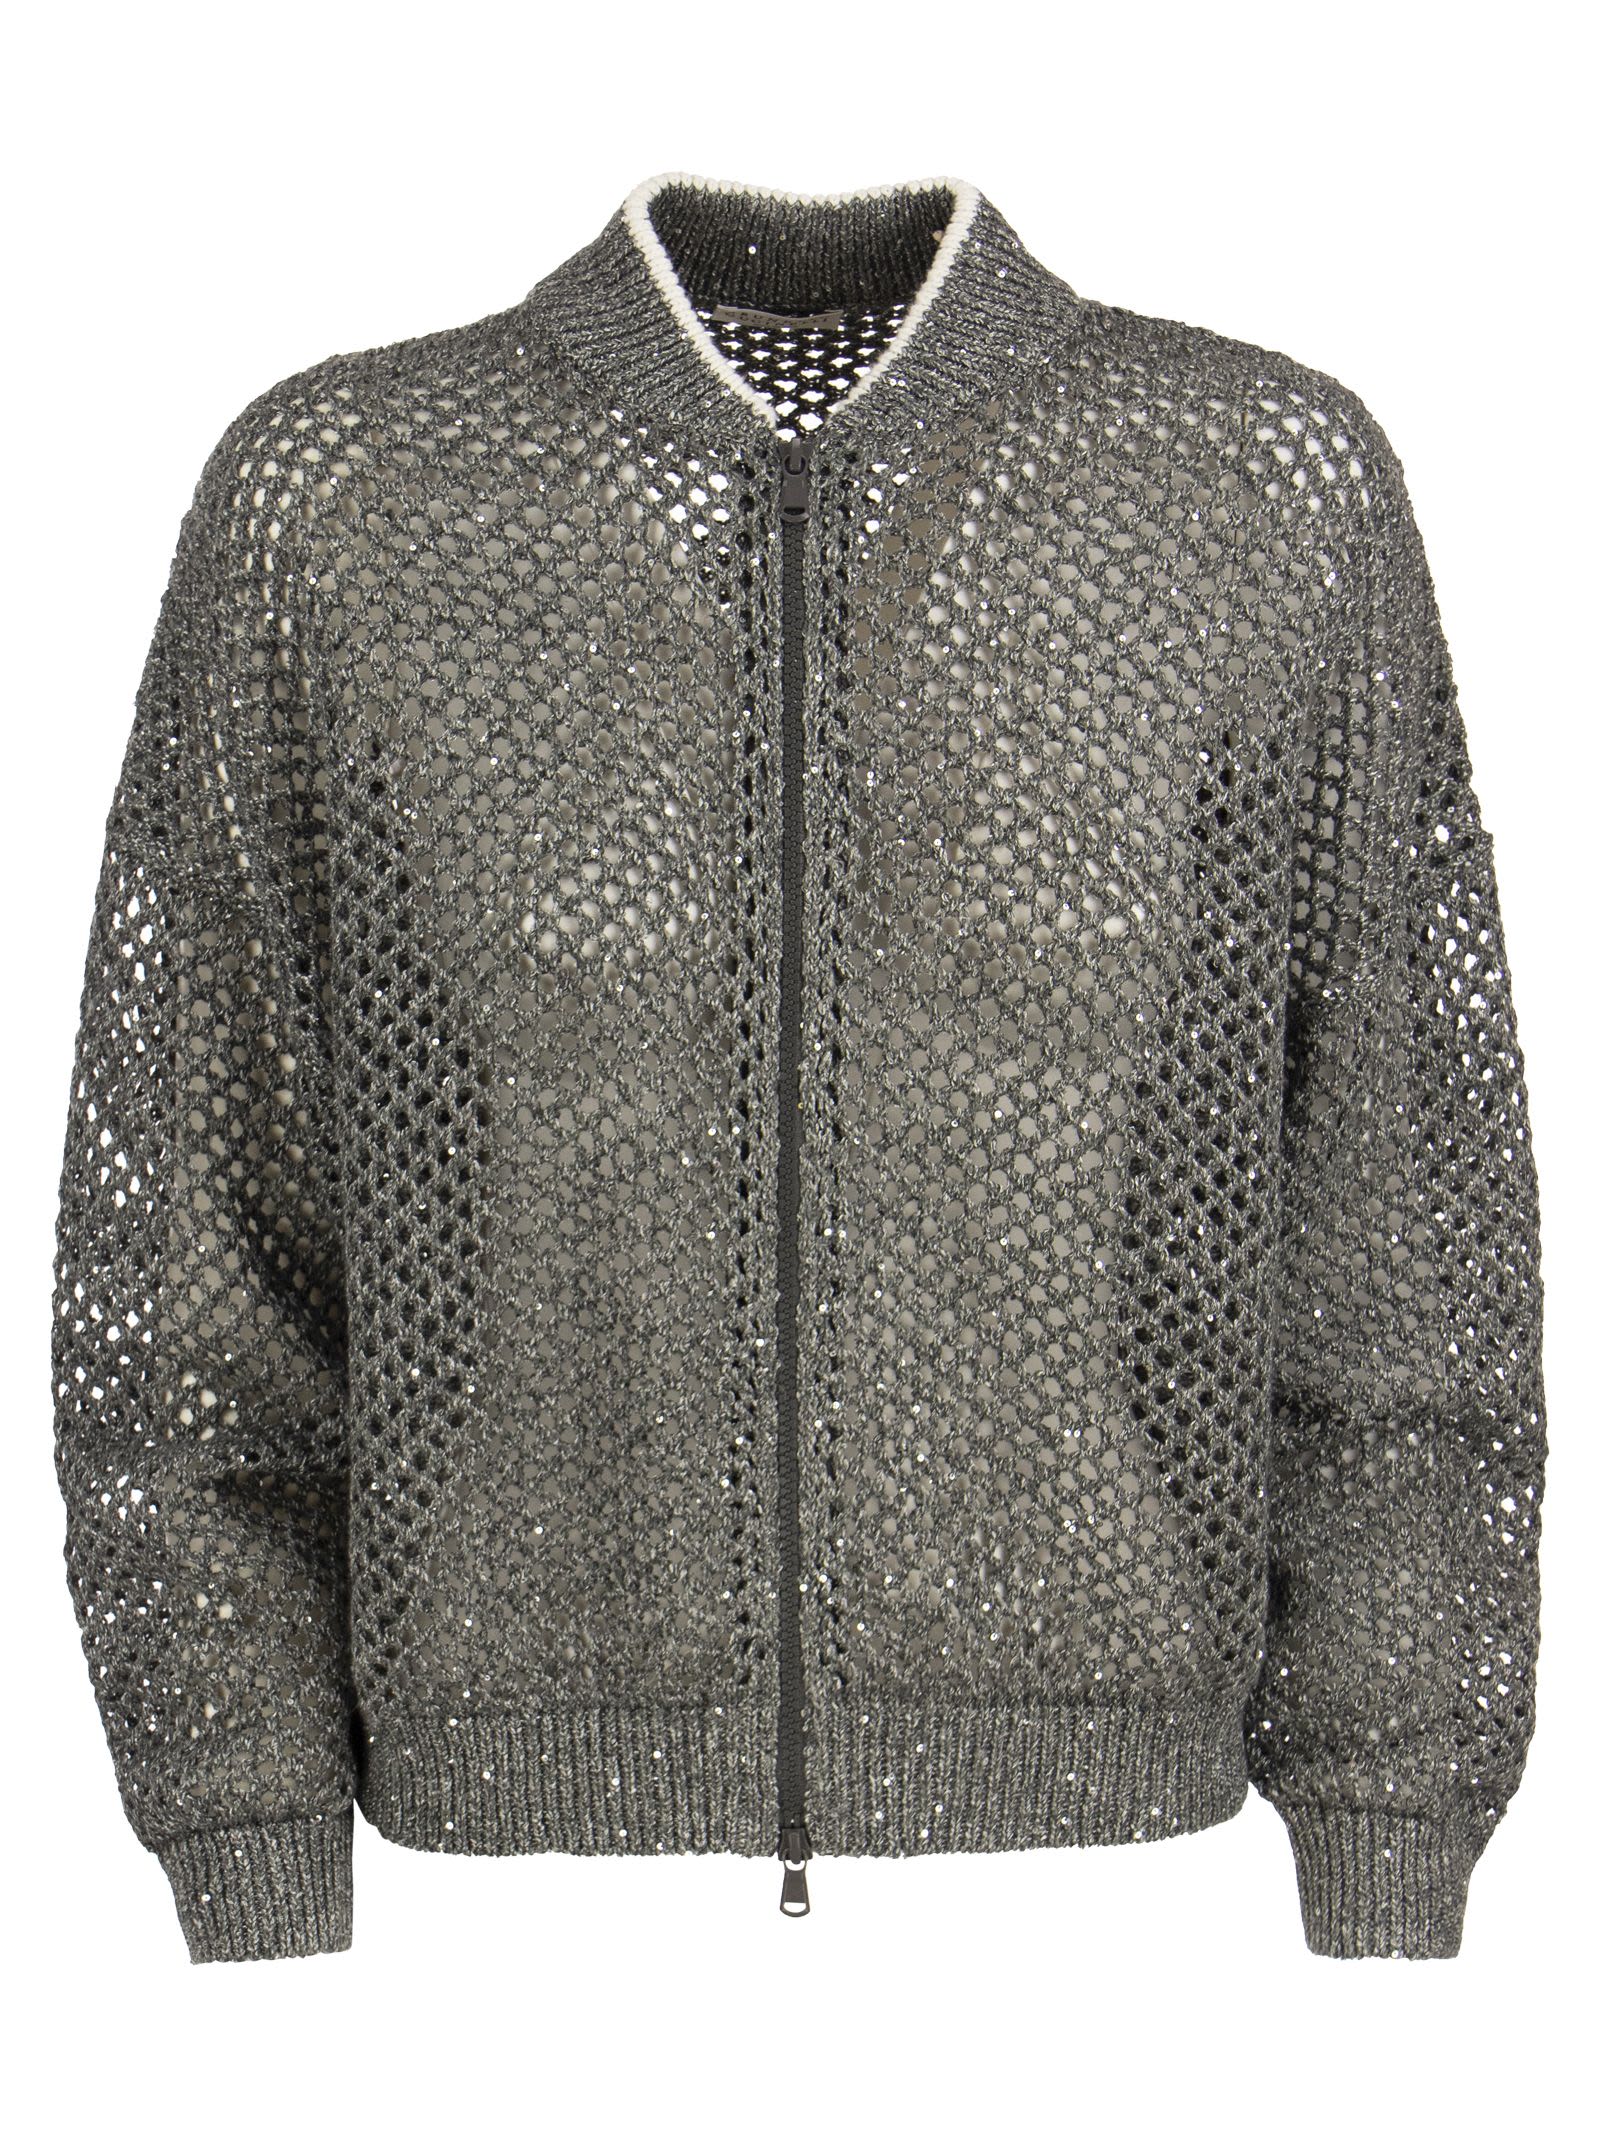 Brunello Cucinelli Sparkling Mesh Bomber Style Linen And Cotton Cardigan